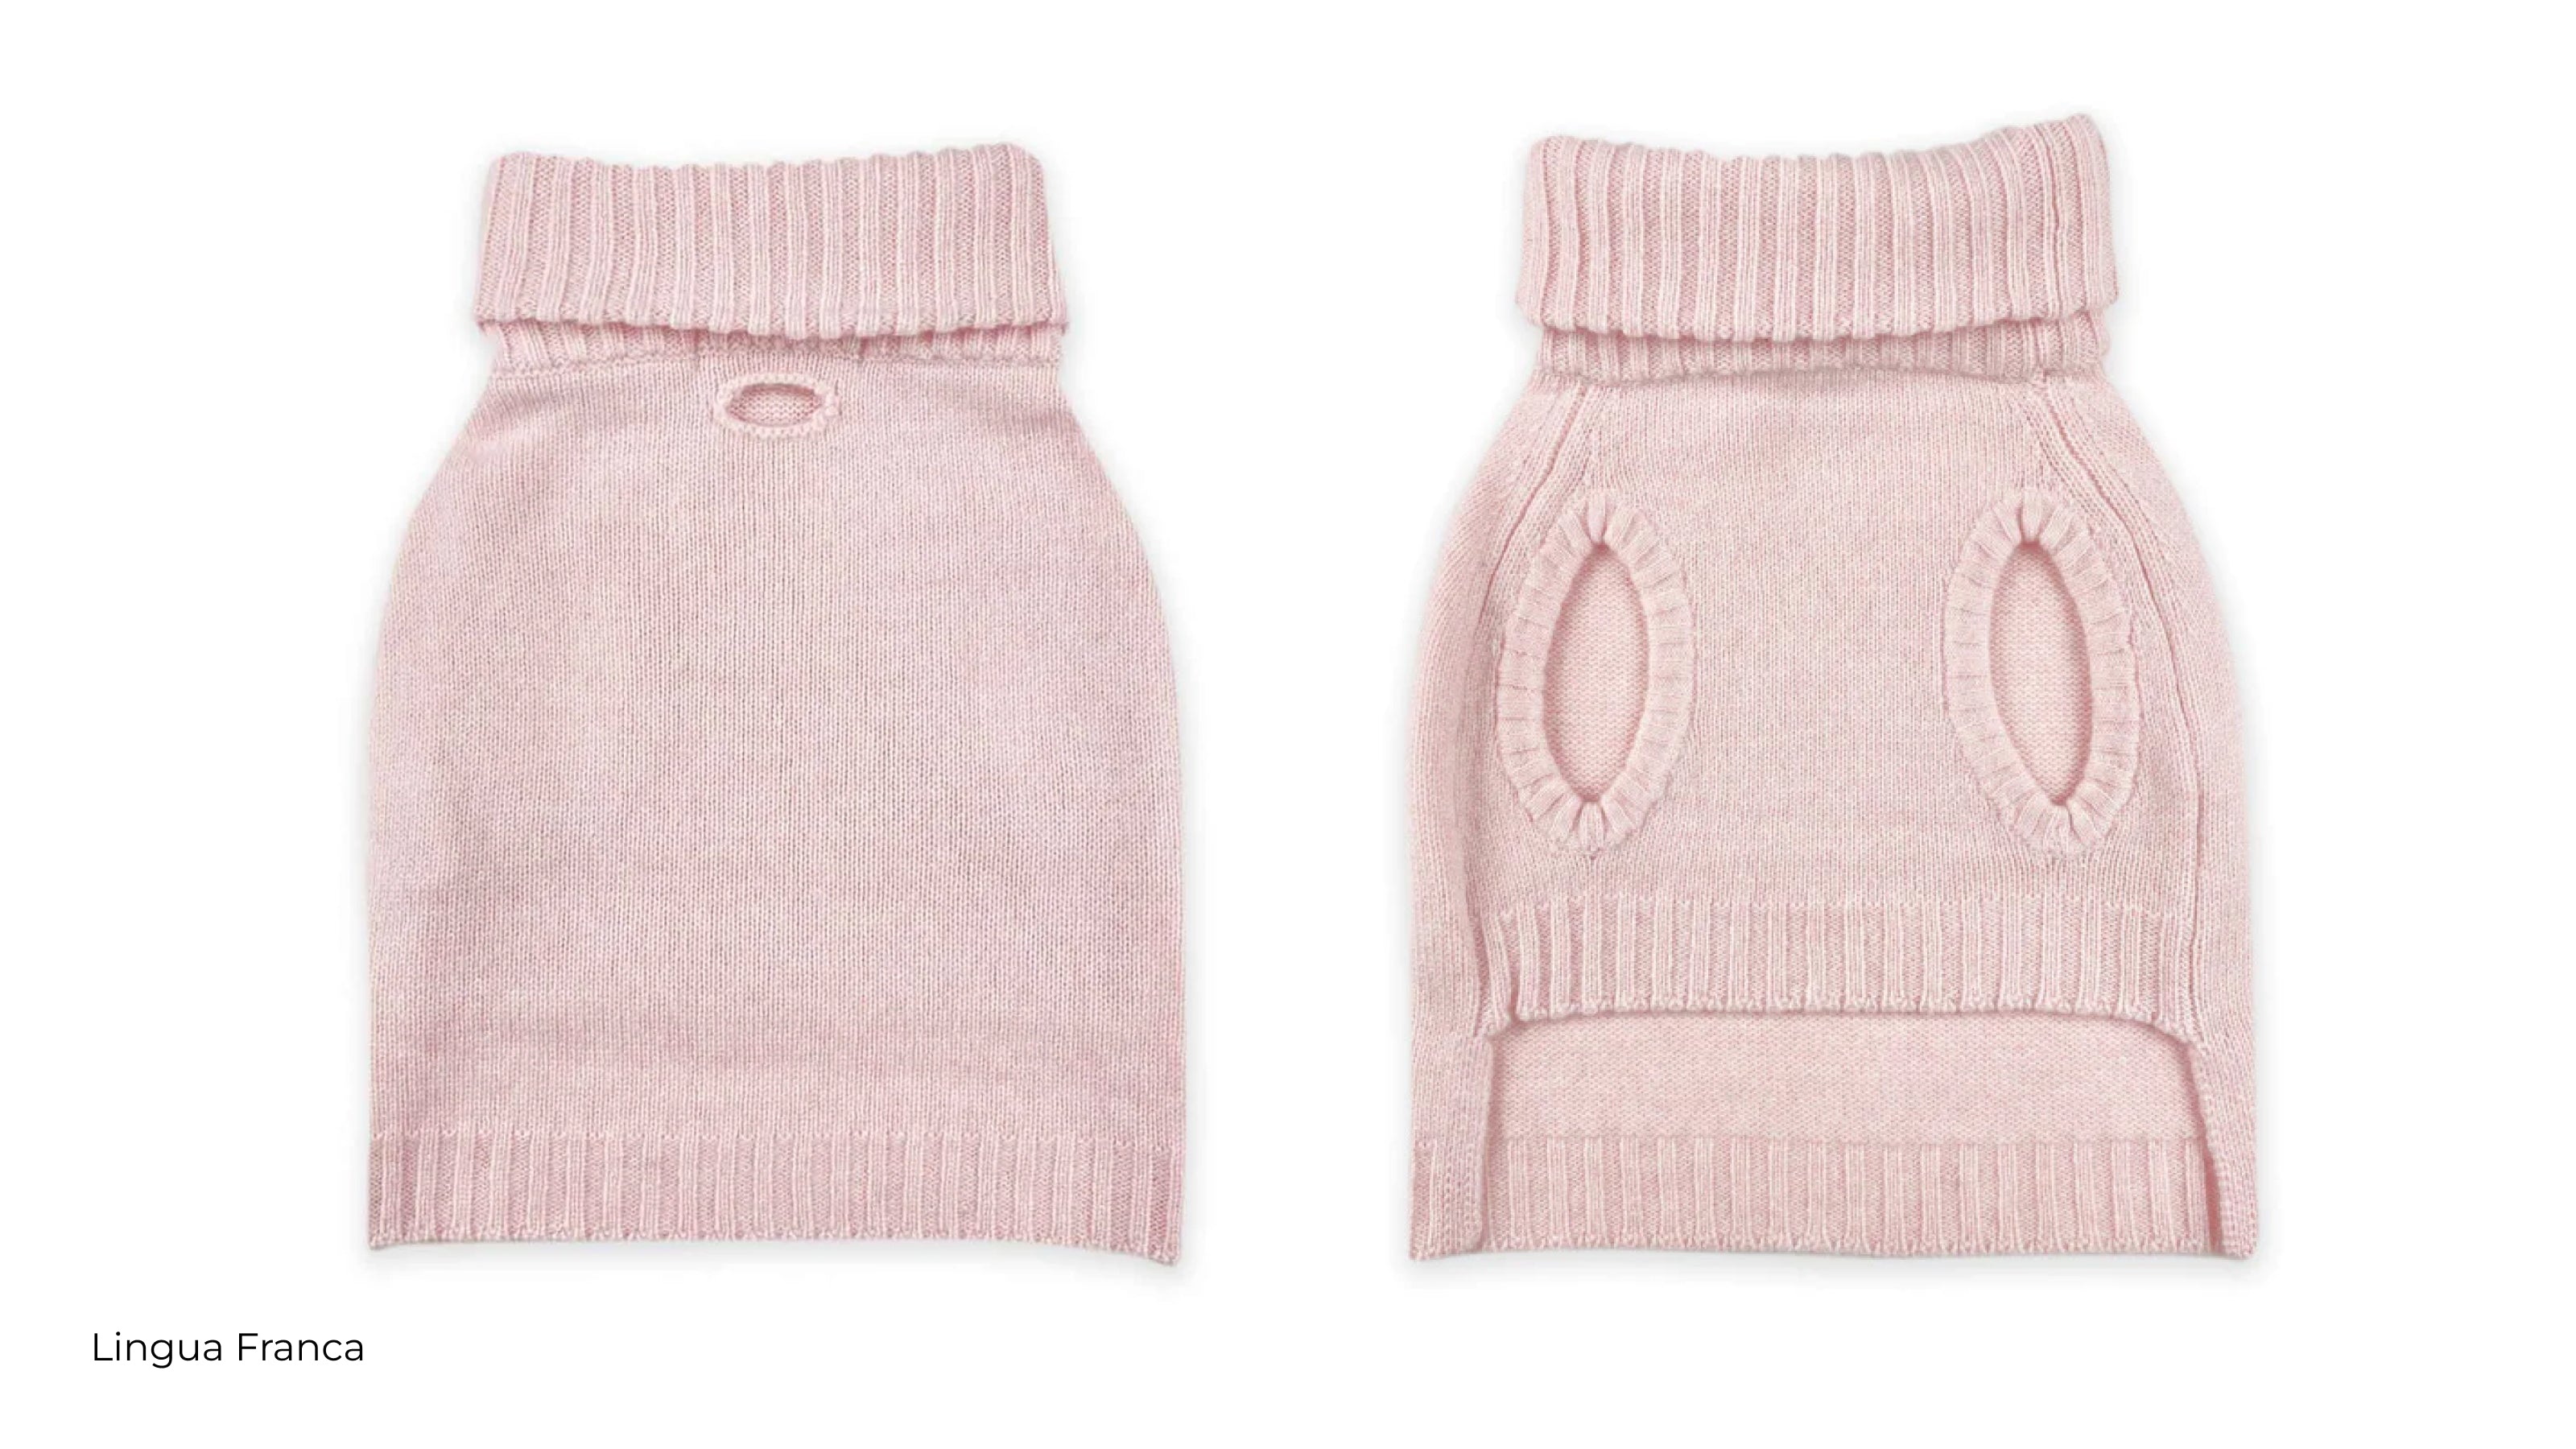 A light pink cashmere dog sweather front and back